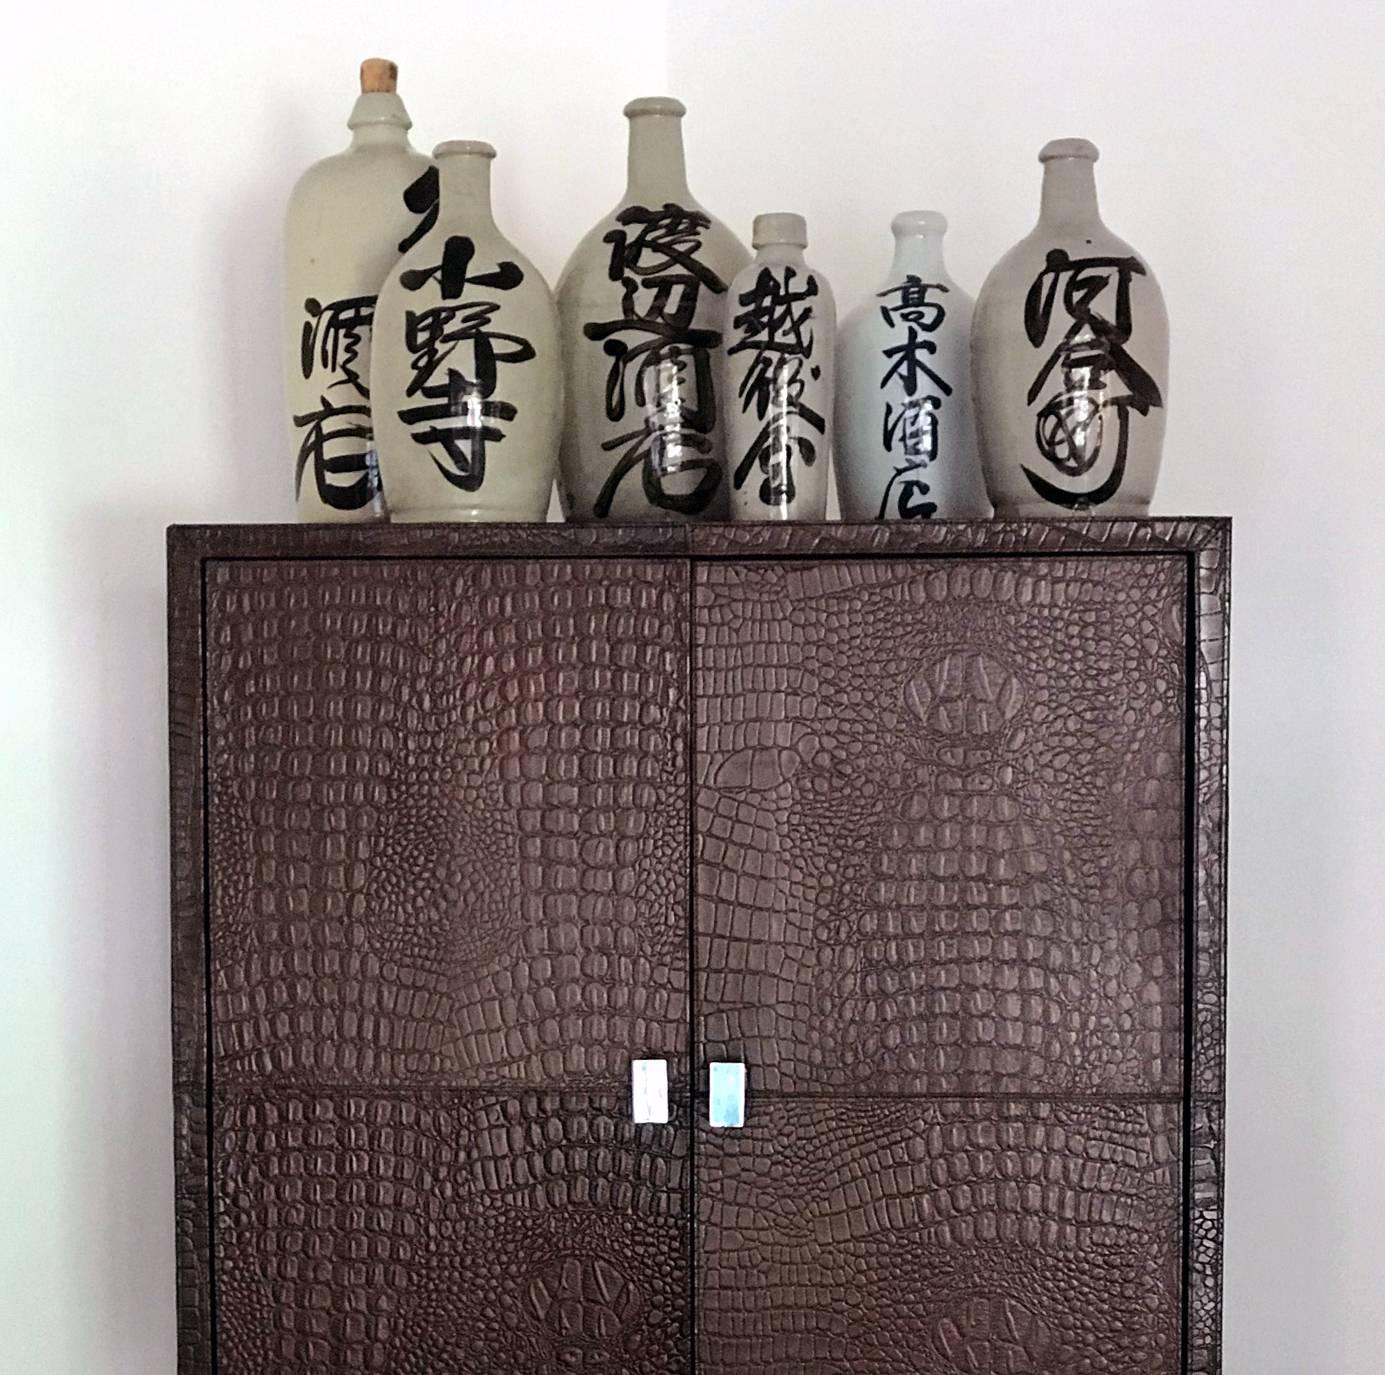 A very cool collection of seven antique Japanese Sake bottle made of ceramic stoneware from Meiji Period, circa 1890s. Of various sizes with the largest one are 17 inches in height and 8 inches in diameter, and the smallest being about 10 inches